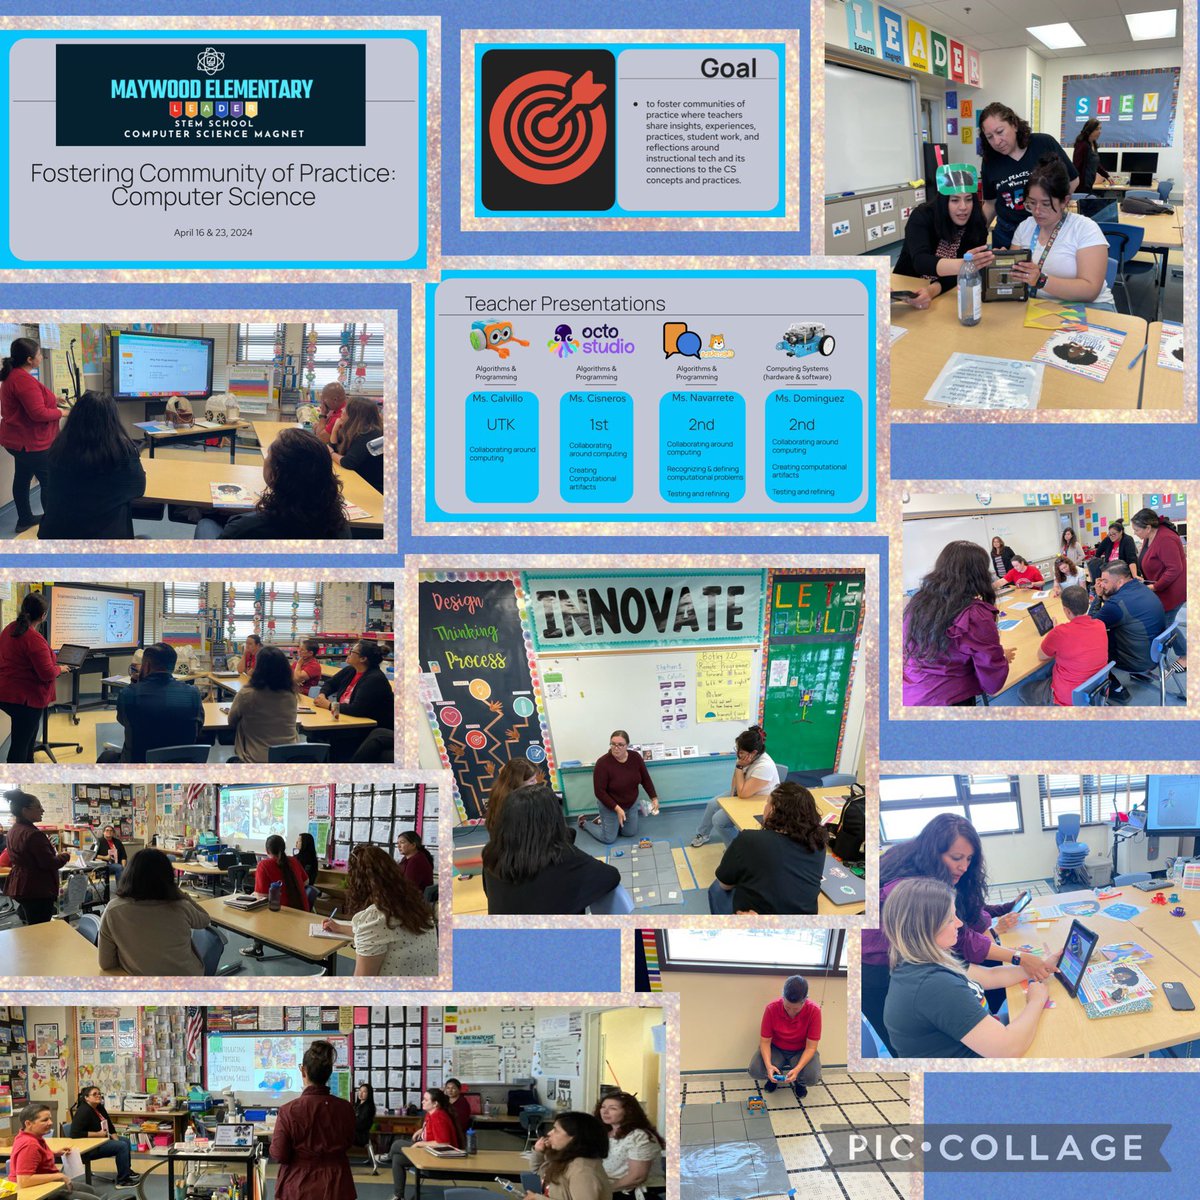 .@MaywoodLEADERS teachers build a community of practice by sharing insights, experiences, practices, student work, and reflections around instructional tech and its connections to the K12 CS concepts and practices. #CS4LAUSD @ITI_LAUSD @LASchoolsEast